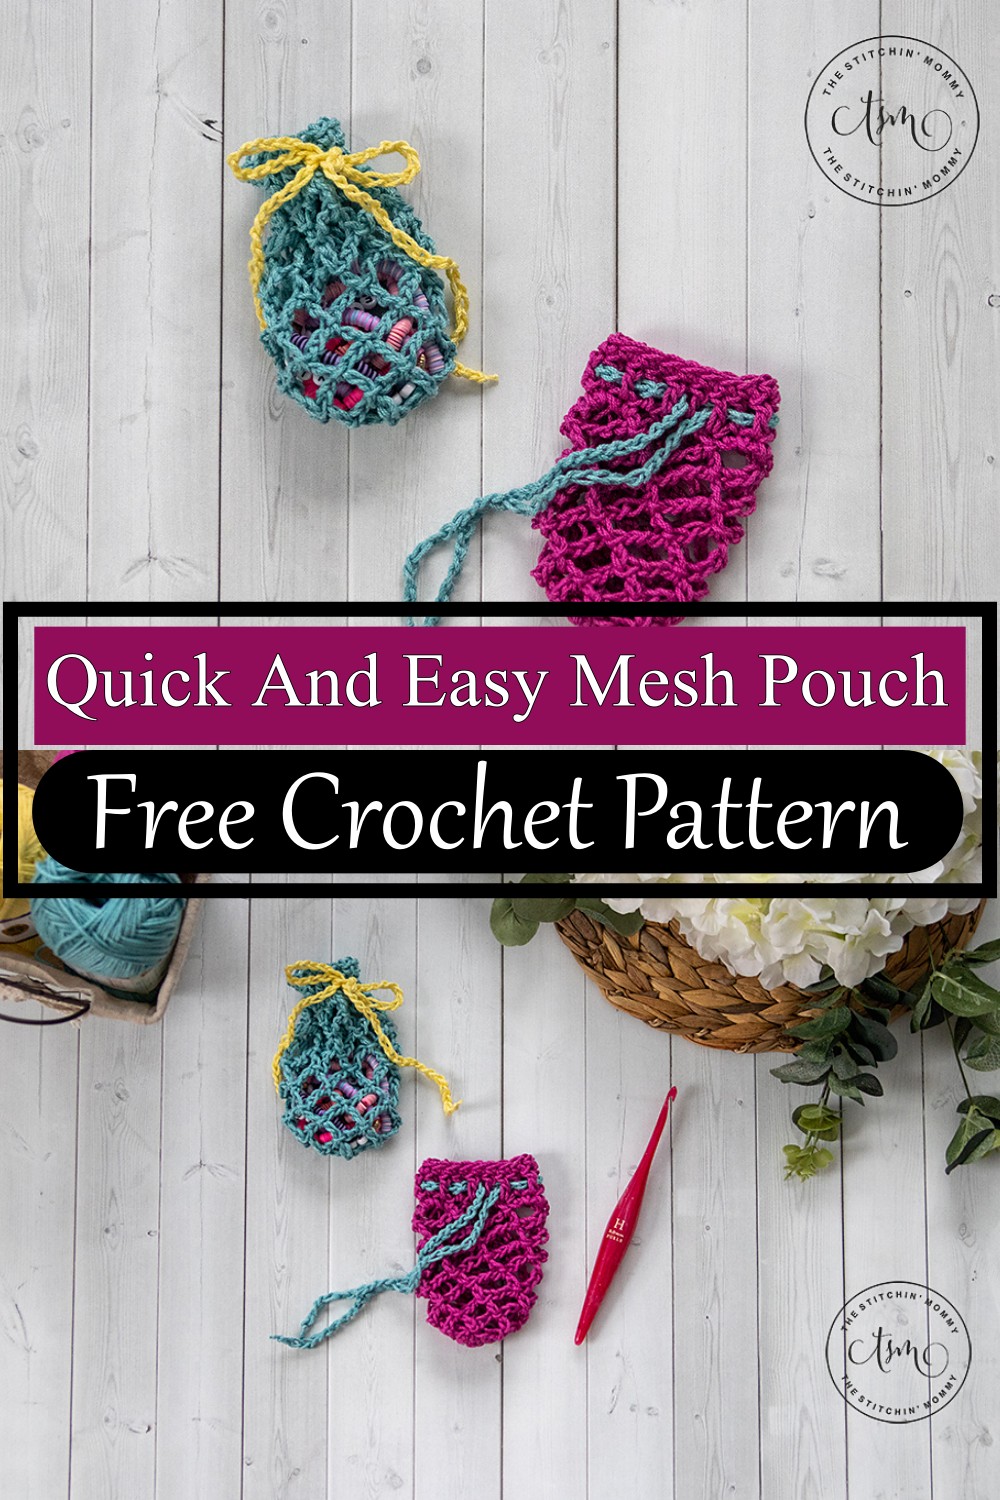 Quick And Easy Mesh Pouch